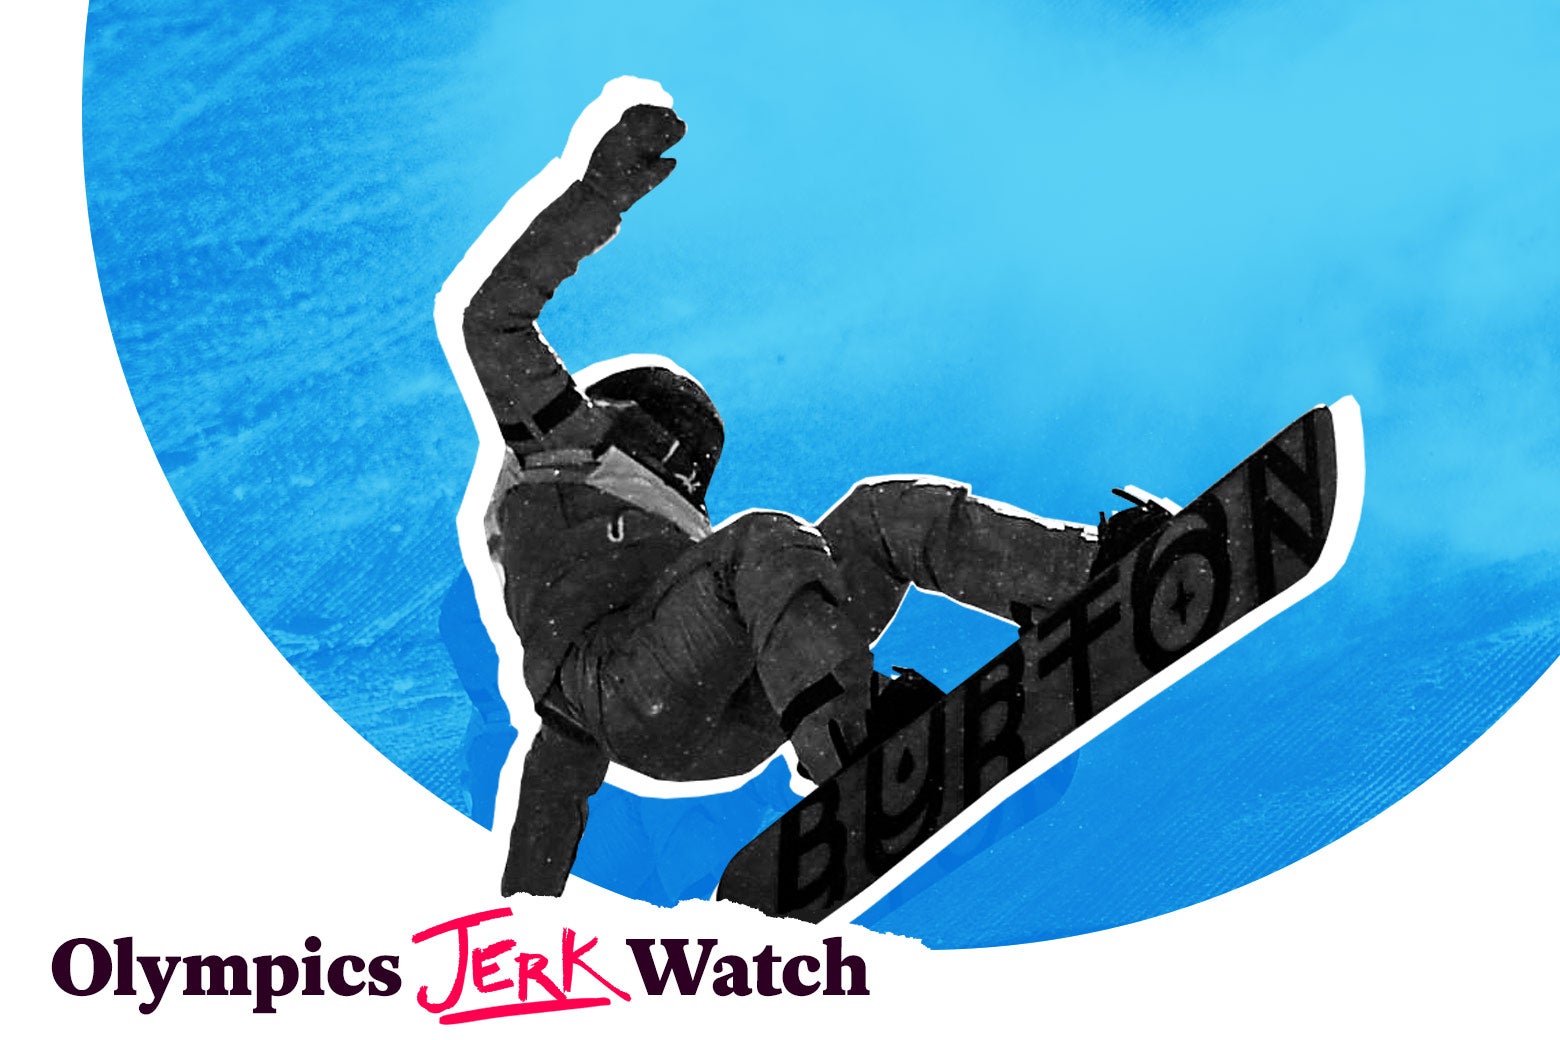 U.S. snowboarder Julia Marino falls in a run of the women’s slopestyle final at the Phoenix Park during the Pyeongchang 2018 Winter Olympic Games on Monday in Pyeongchang.